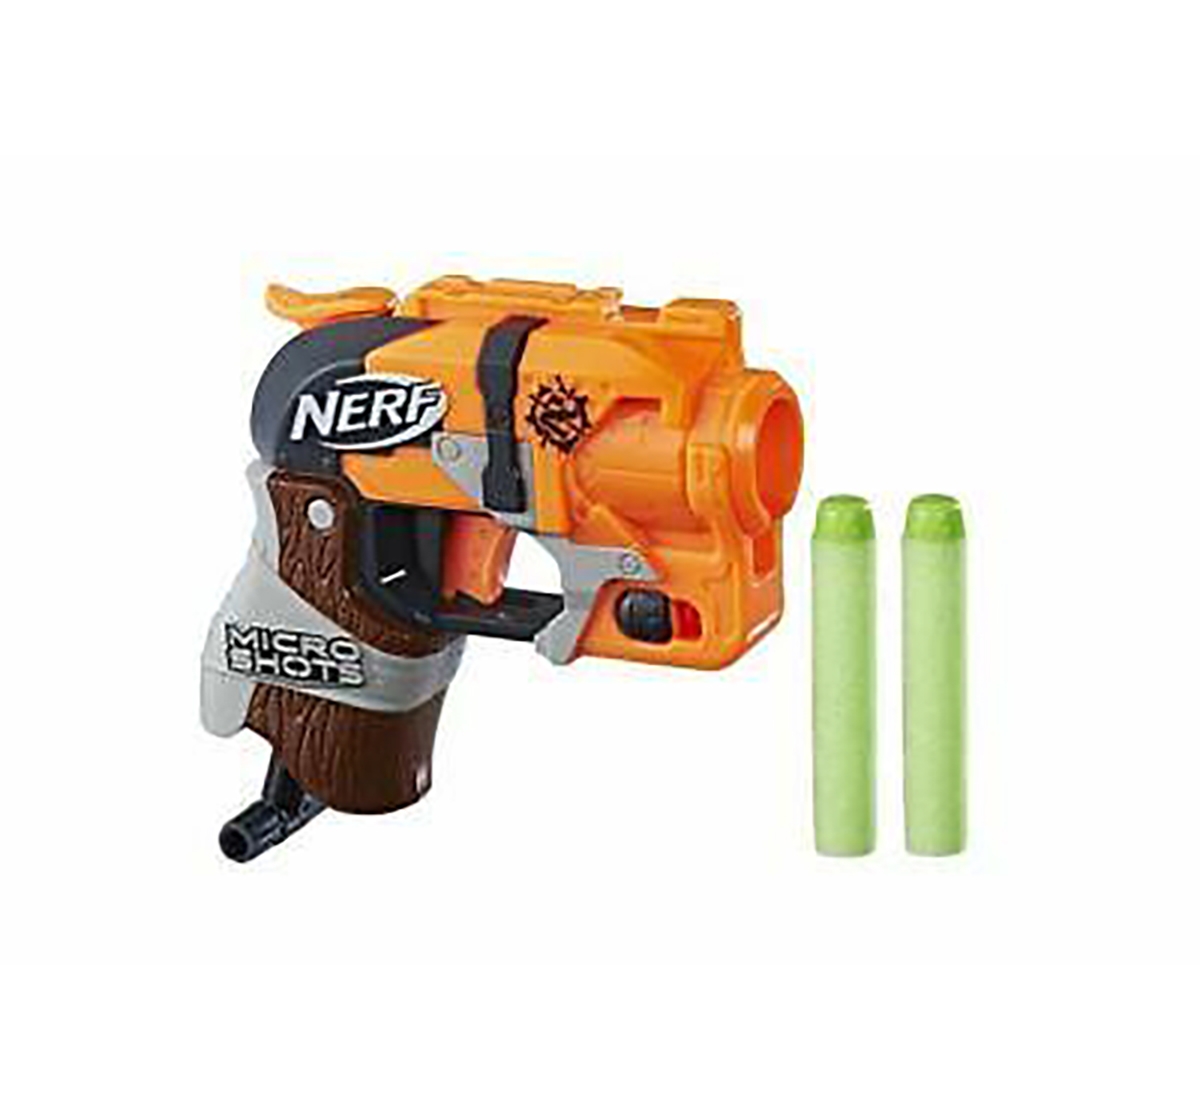 Nerf | Nerf Microshots Blaster and Combats Assorted Blasters for Kids age 8Y+ 0